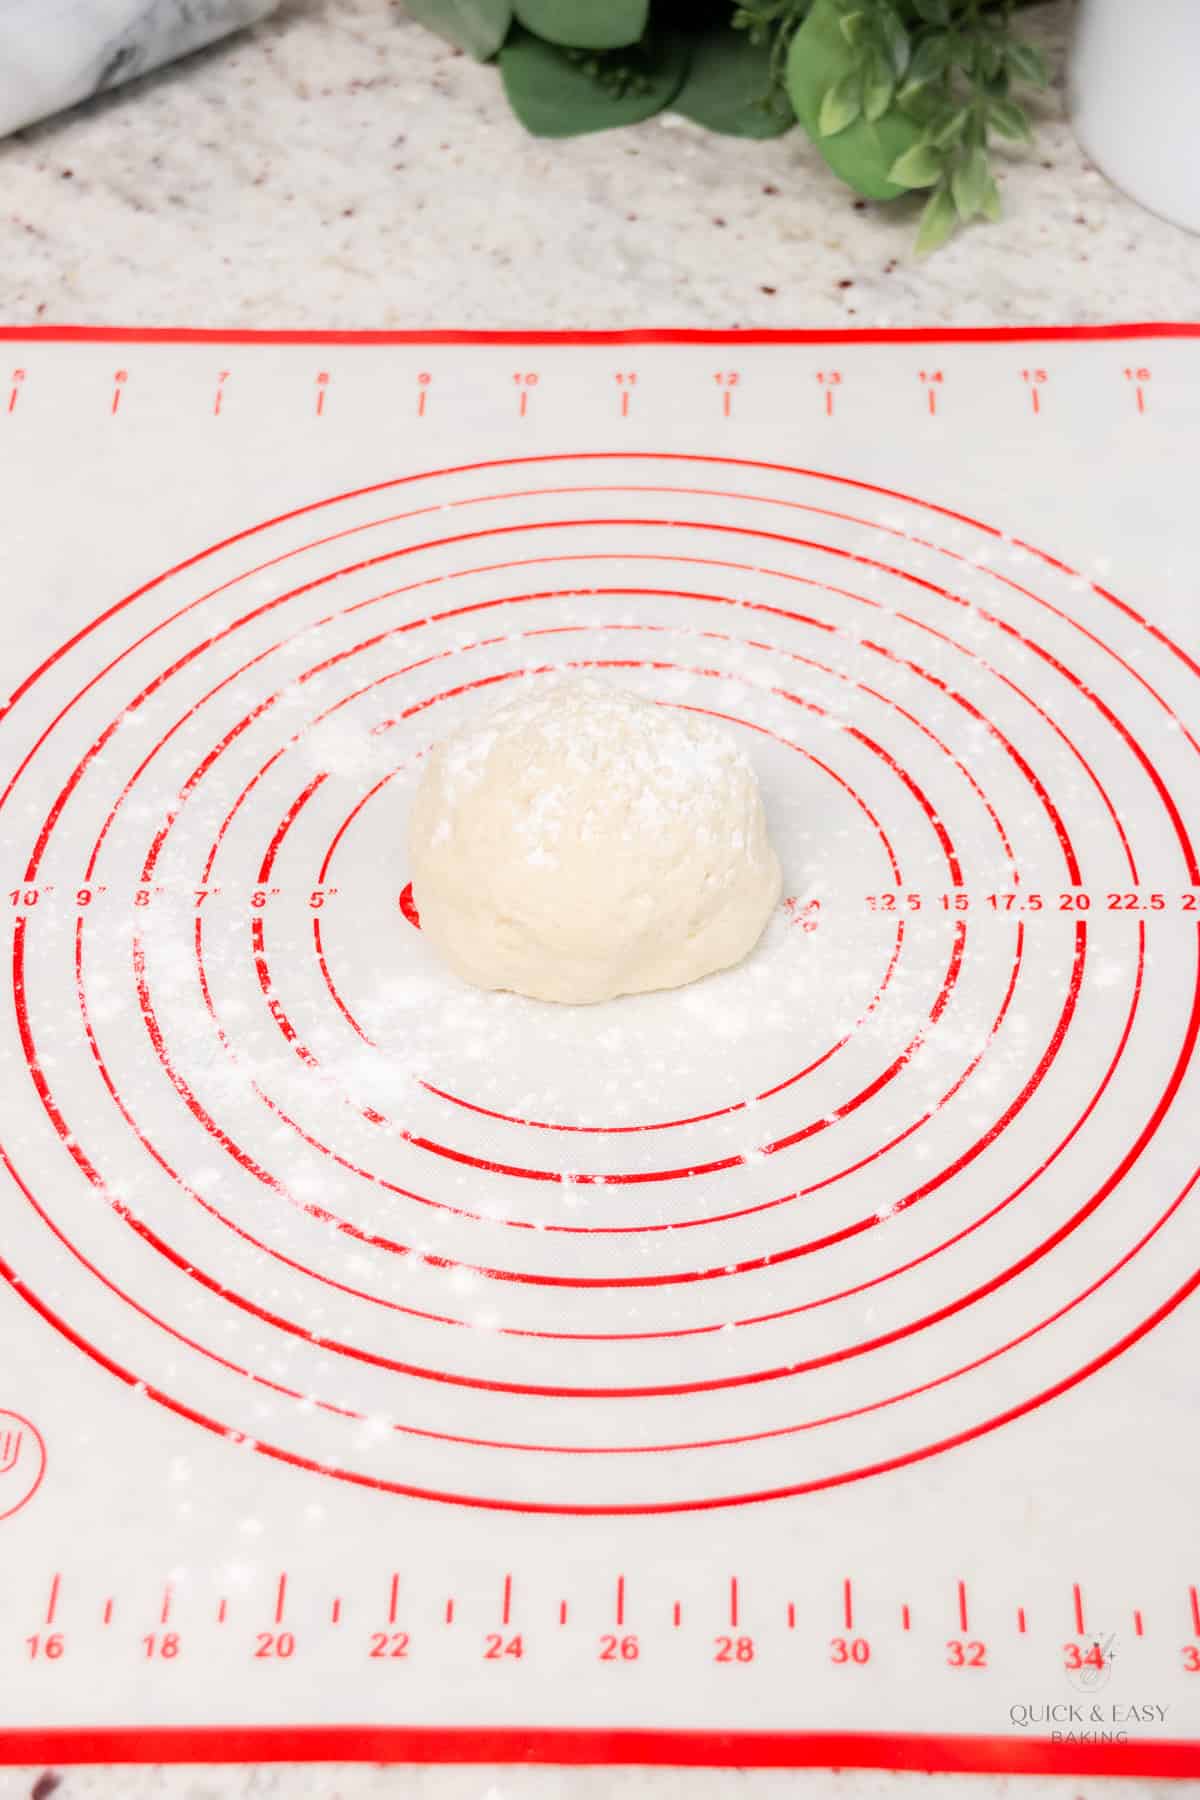 Pizza dough in a ball shape on a nonstick surface.